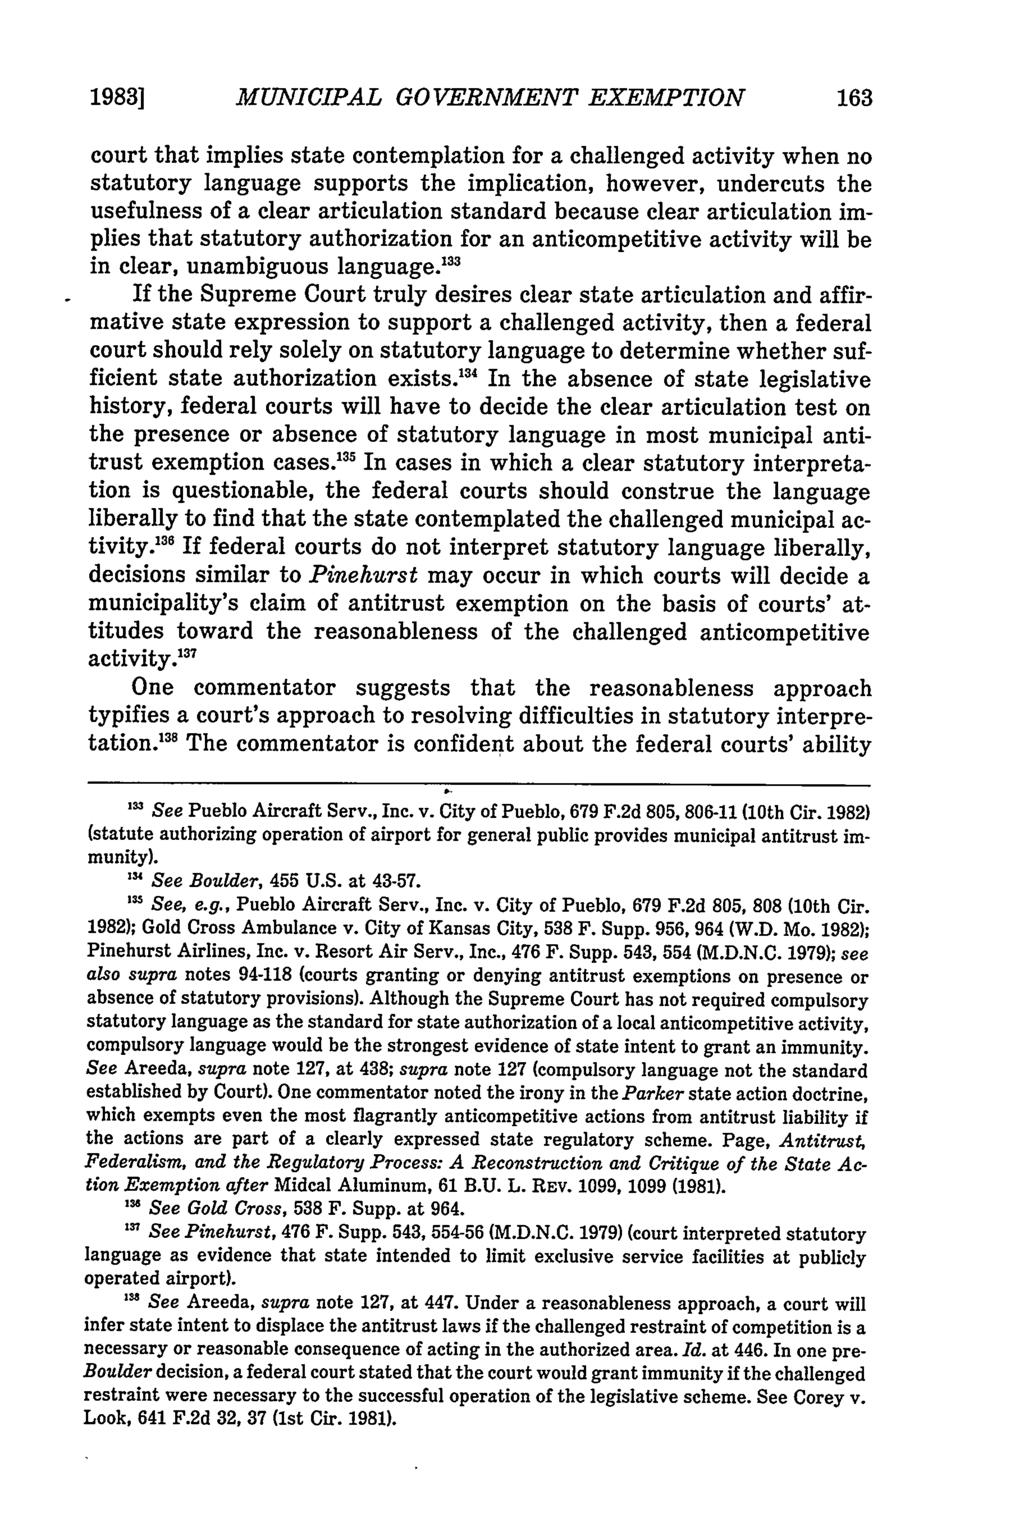 1983] MUNICIPAL GO VERNMENT EXEMPTION court that implies state contemplation for a challenged activity when no statutory language supports the implication, however, undercuts the usefulness of a